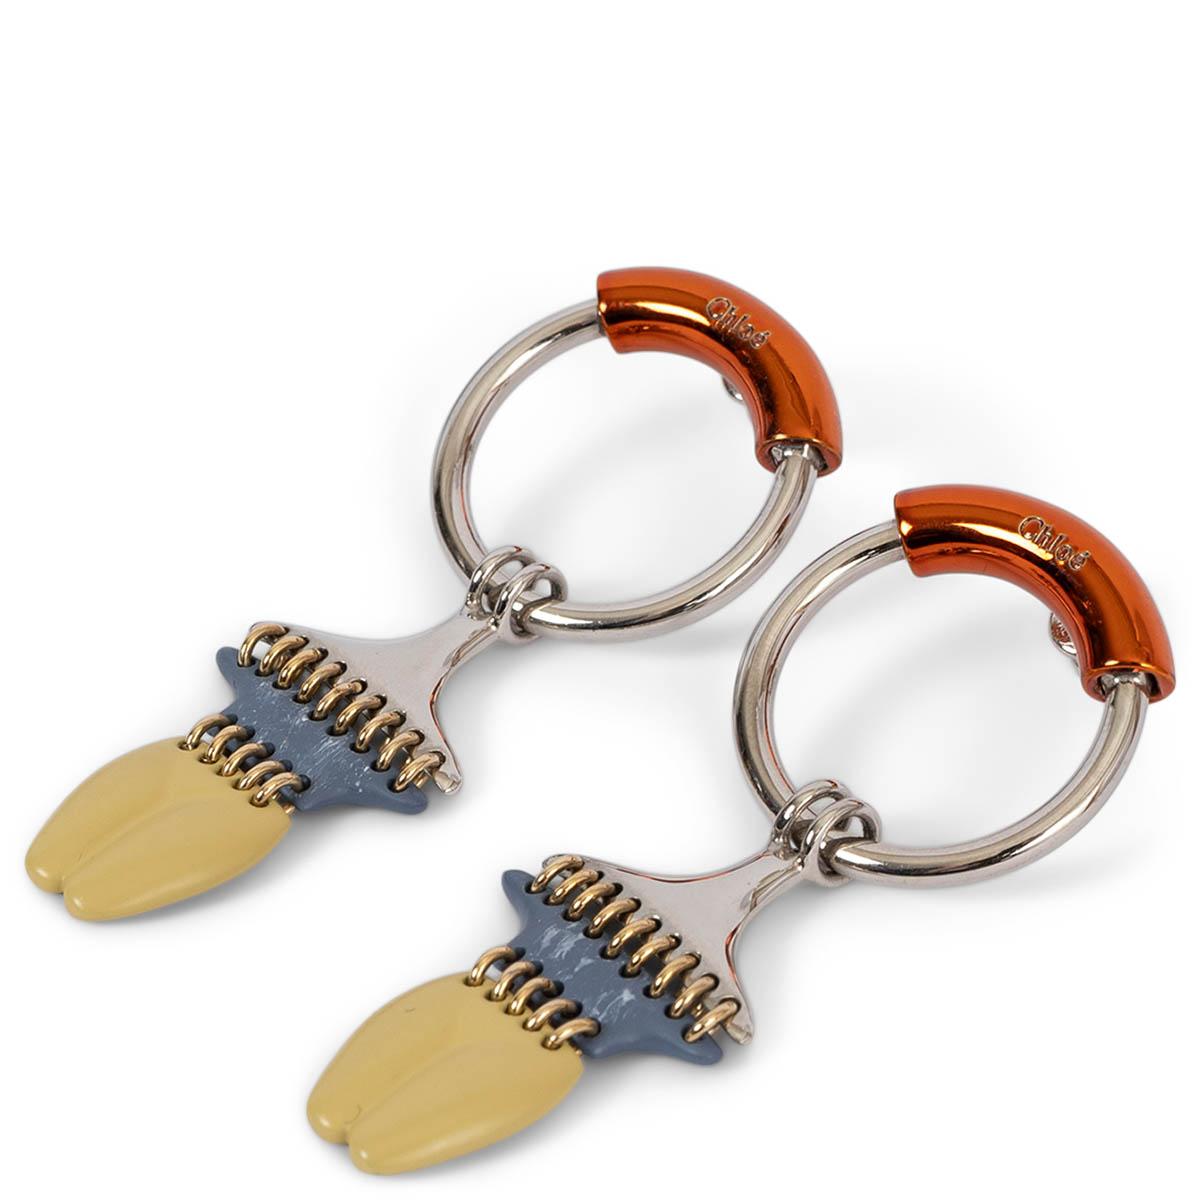 100% authentic Chloé Femininities dangle hoop earring female body shape in silver-tone and orange brass with blue and yellow enamel. Have been worn once and are in virtually new condition. 


Measurements
Width	2.5cm (1in)
Length	6cm